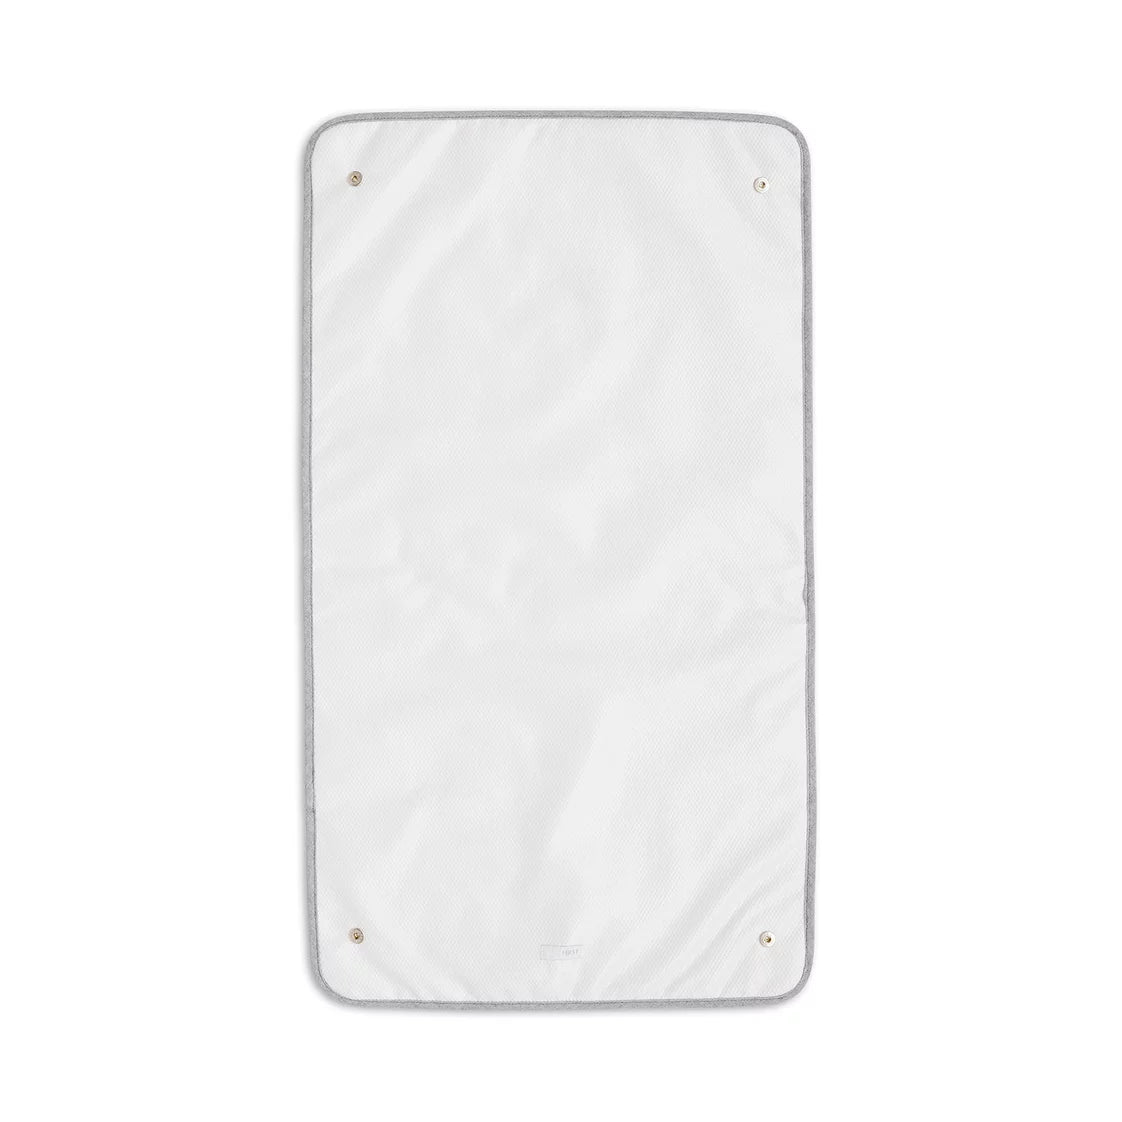 First Endless Grey Changing Pad Extra Towels